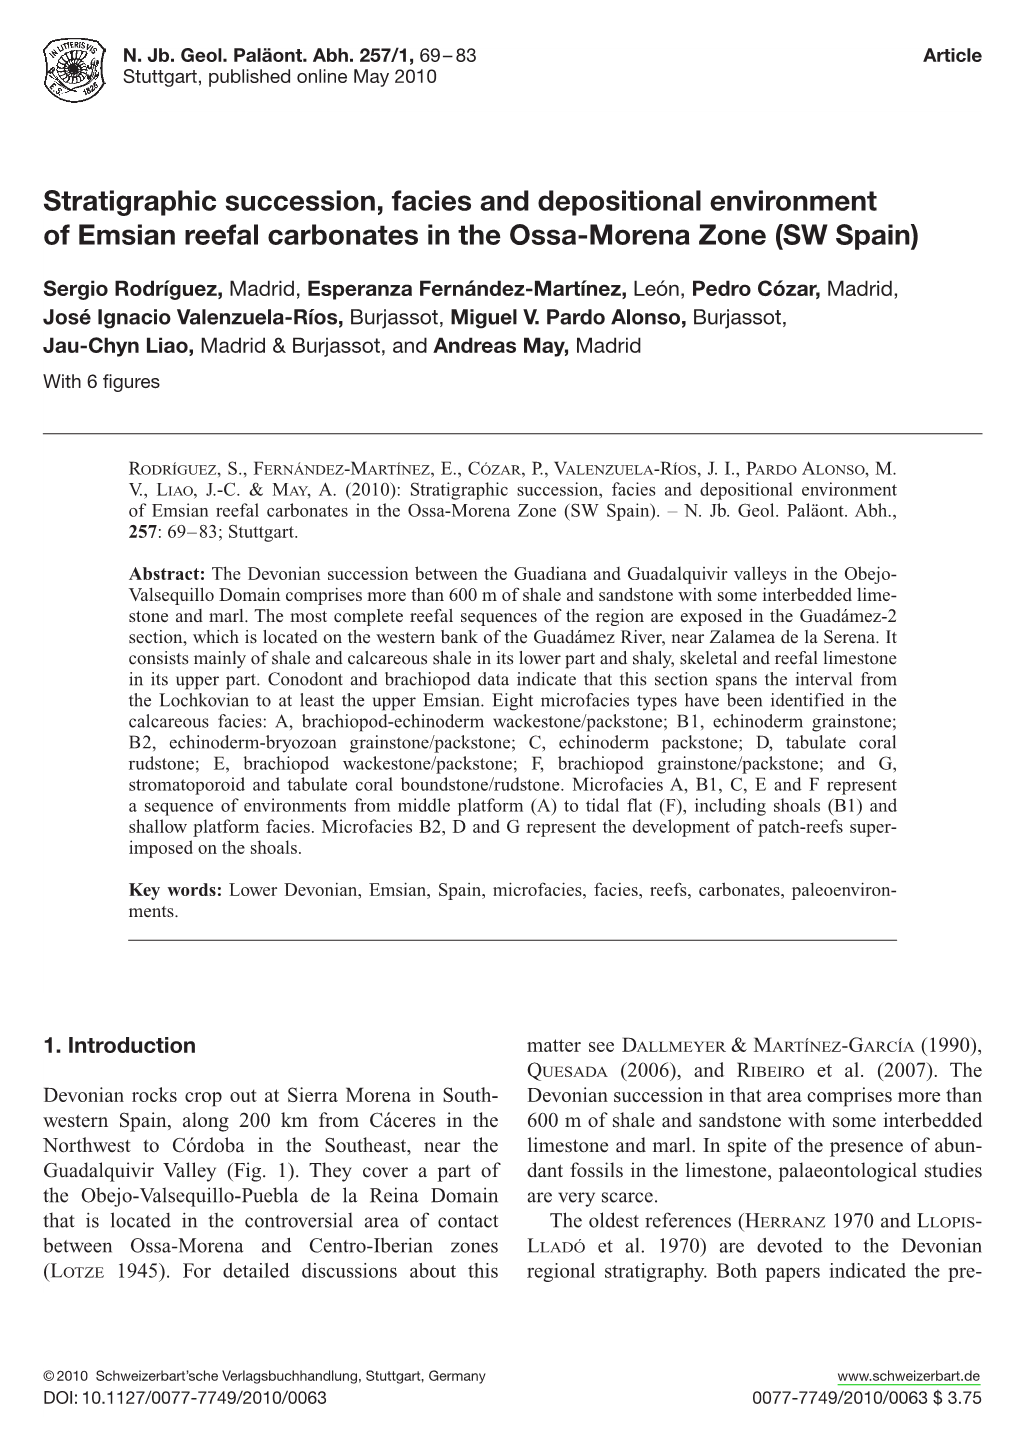 Stratigraphic Succession, Facies and Depositional Environment of Emsian Reefal Carbonates in the Ossa-Morena Zone (SW Spain)